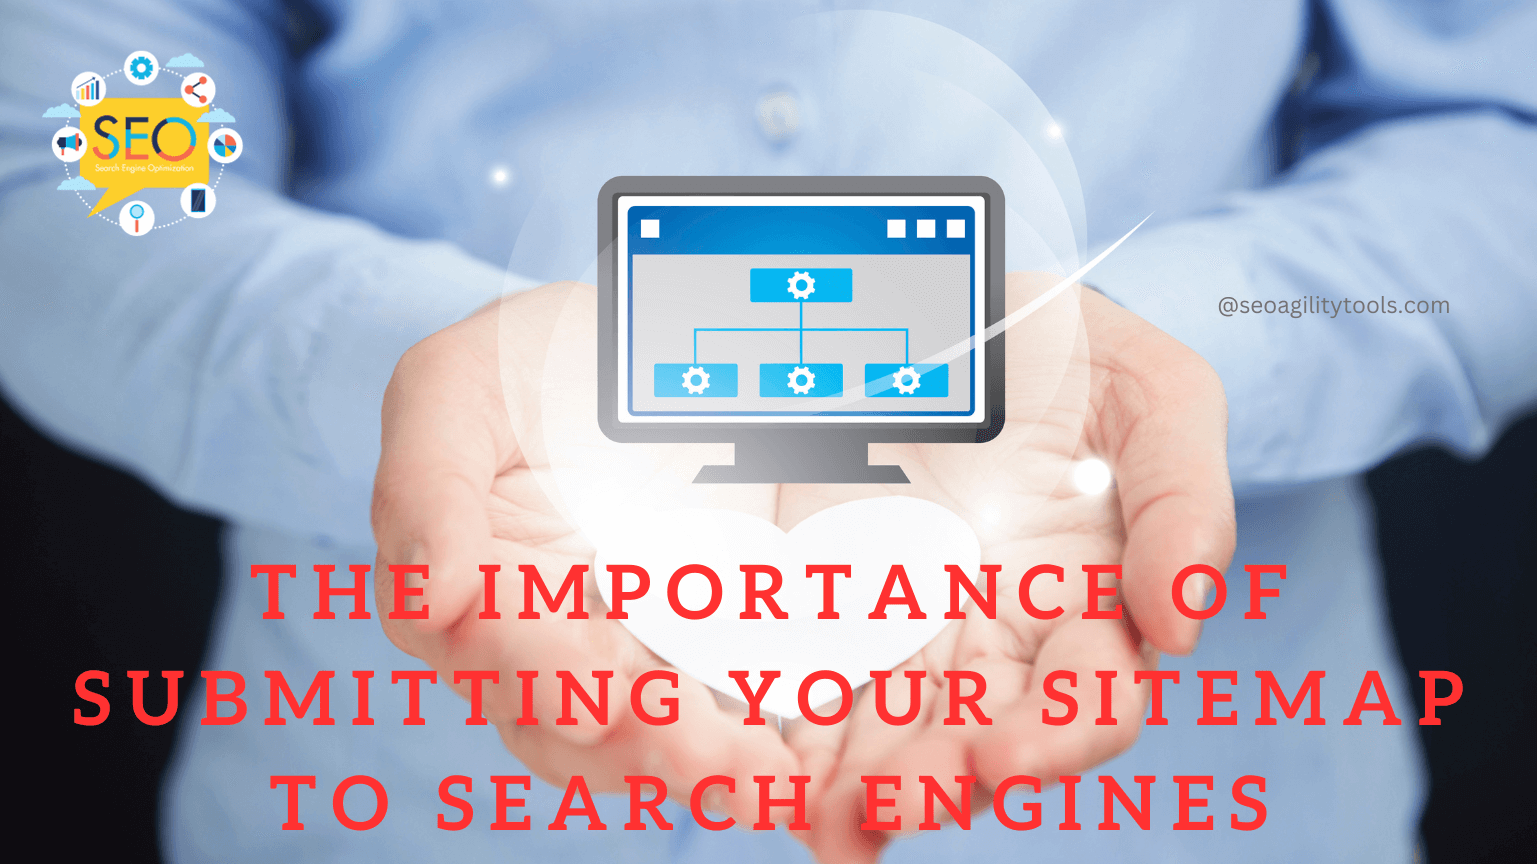 The Importance of Submitting Your Sitemap to Search Engines